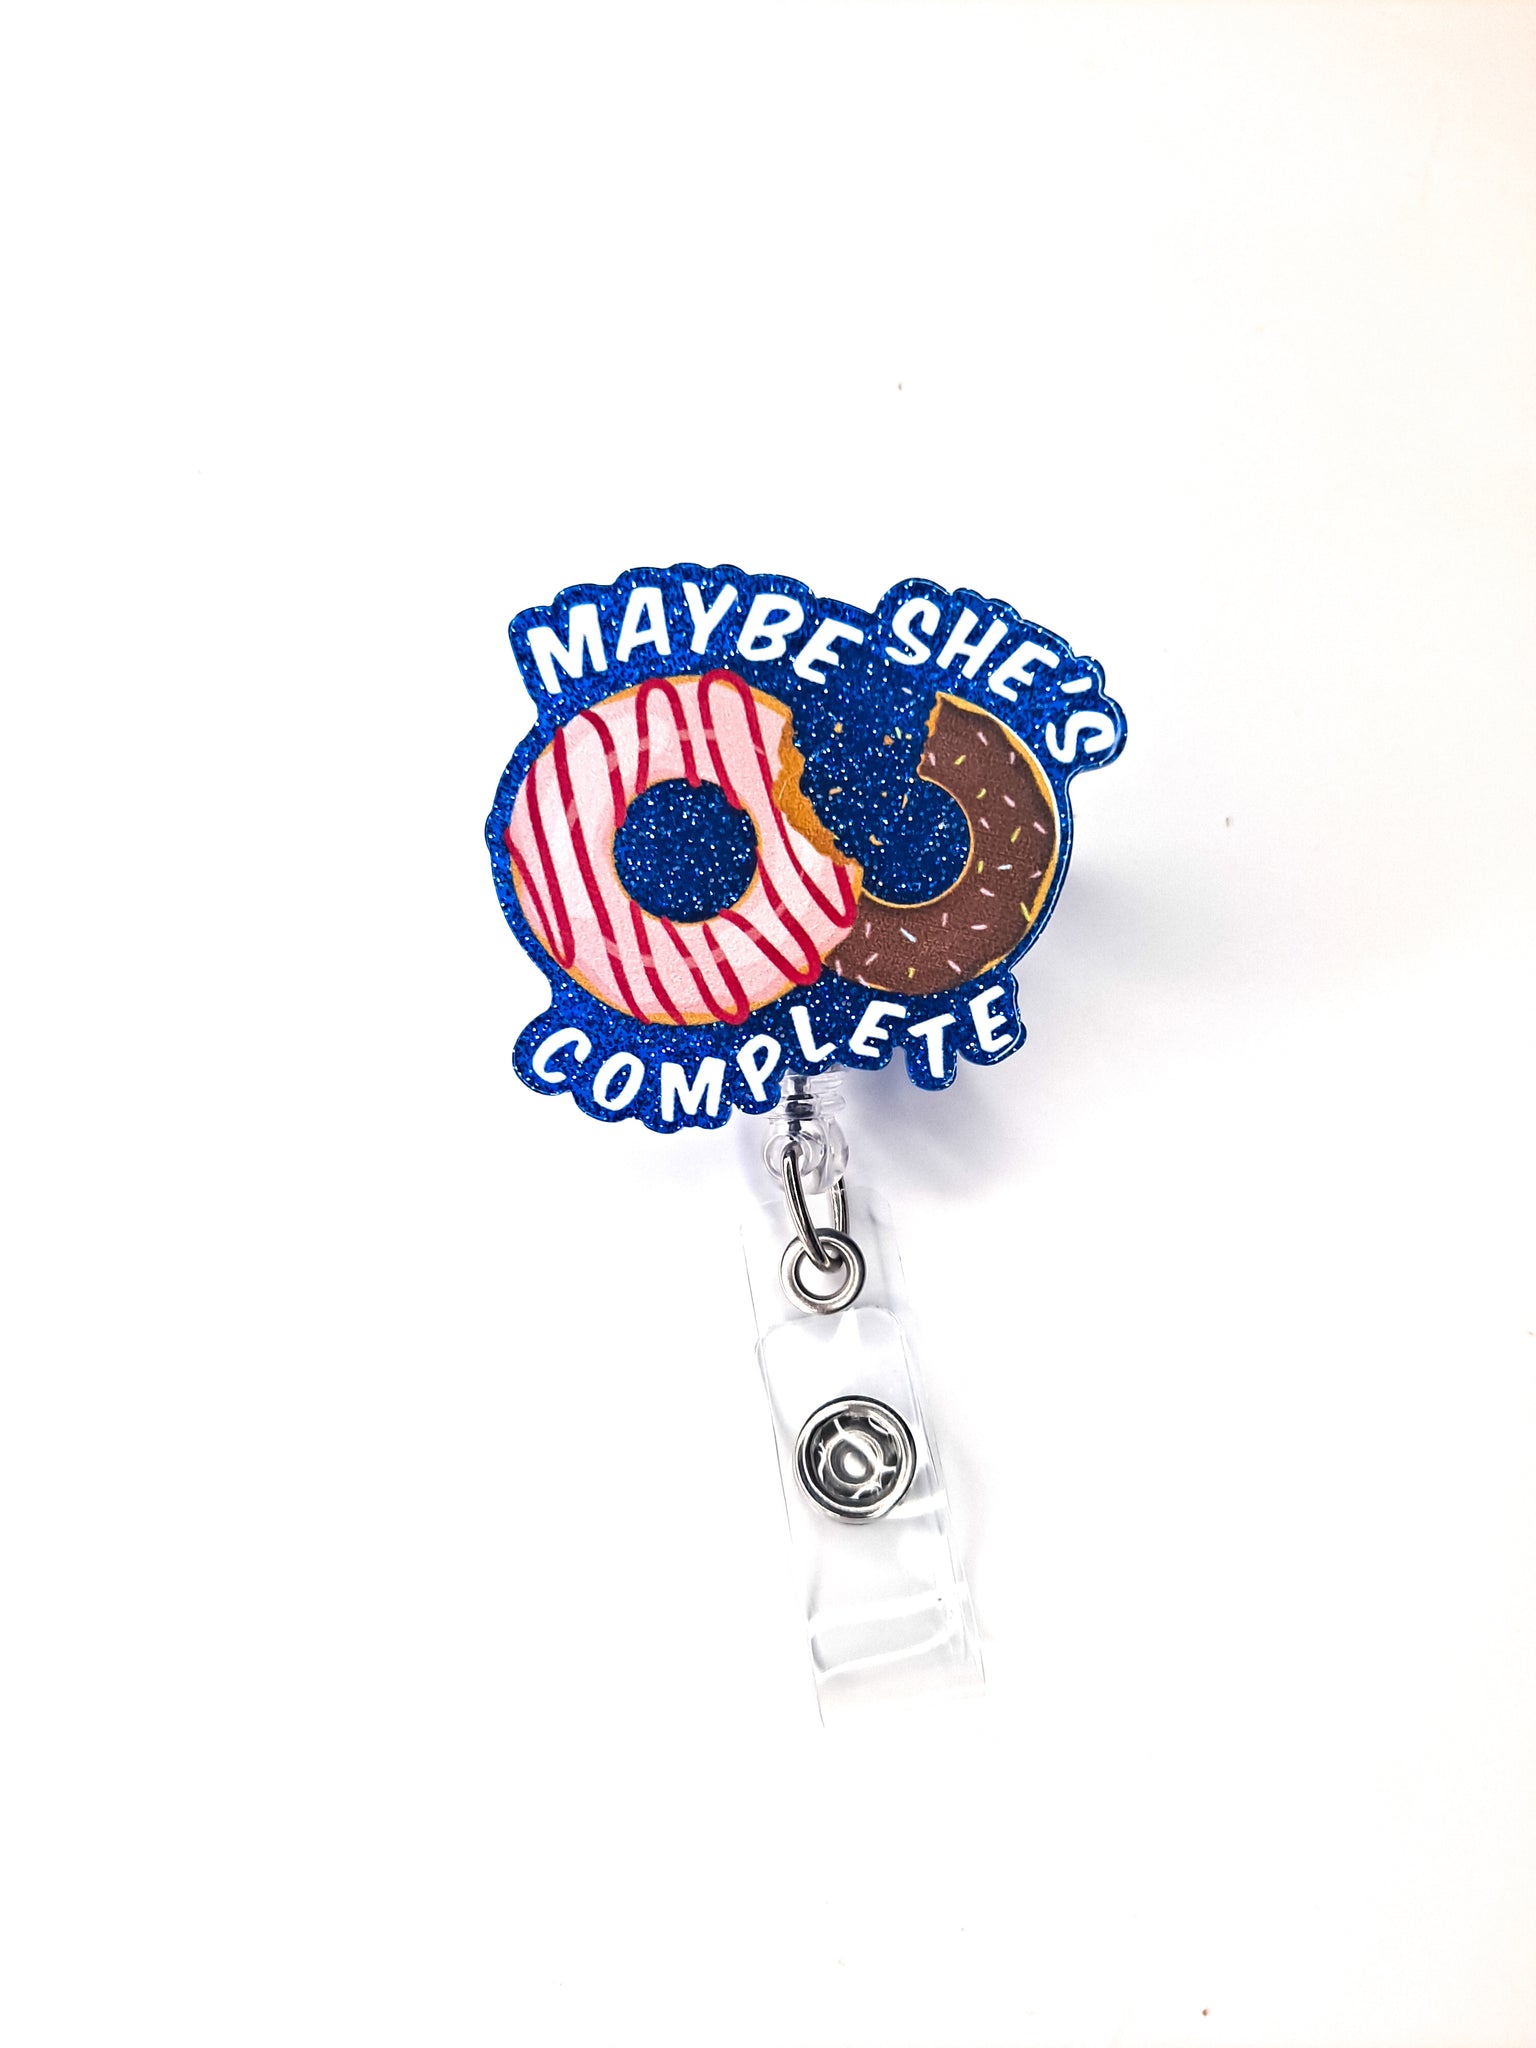 Humorous maybe she's complete - retractable reel - badge holder - funn